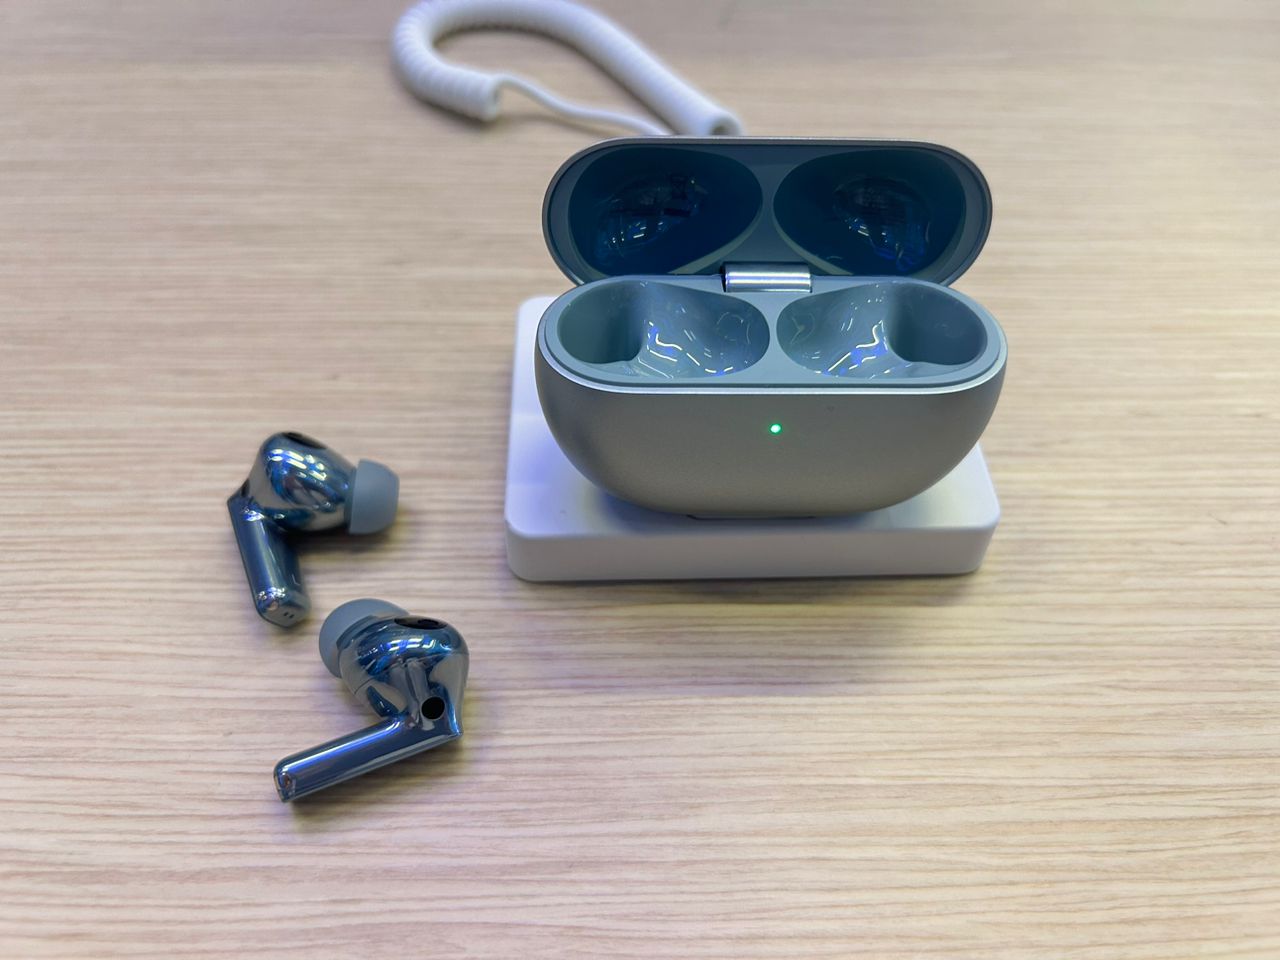 Huawei FreeBuds Pro 3 earbuds to launch later this year - Huawei Central